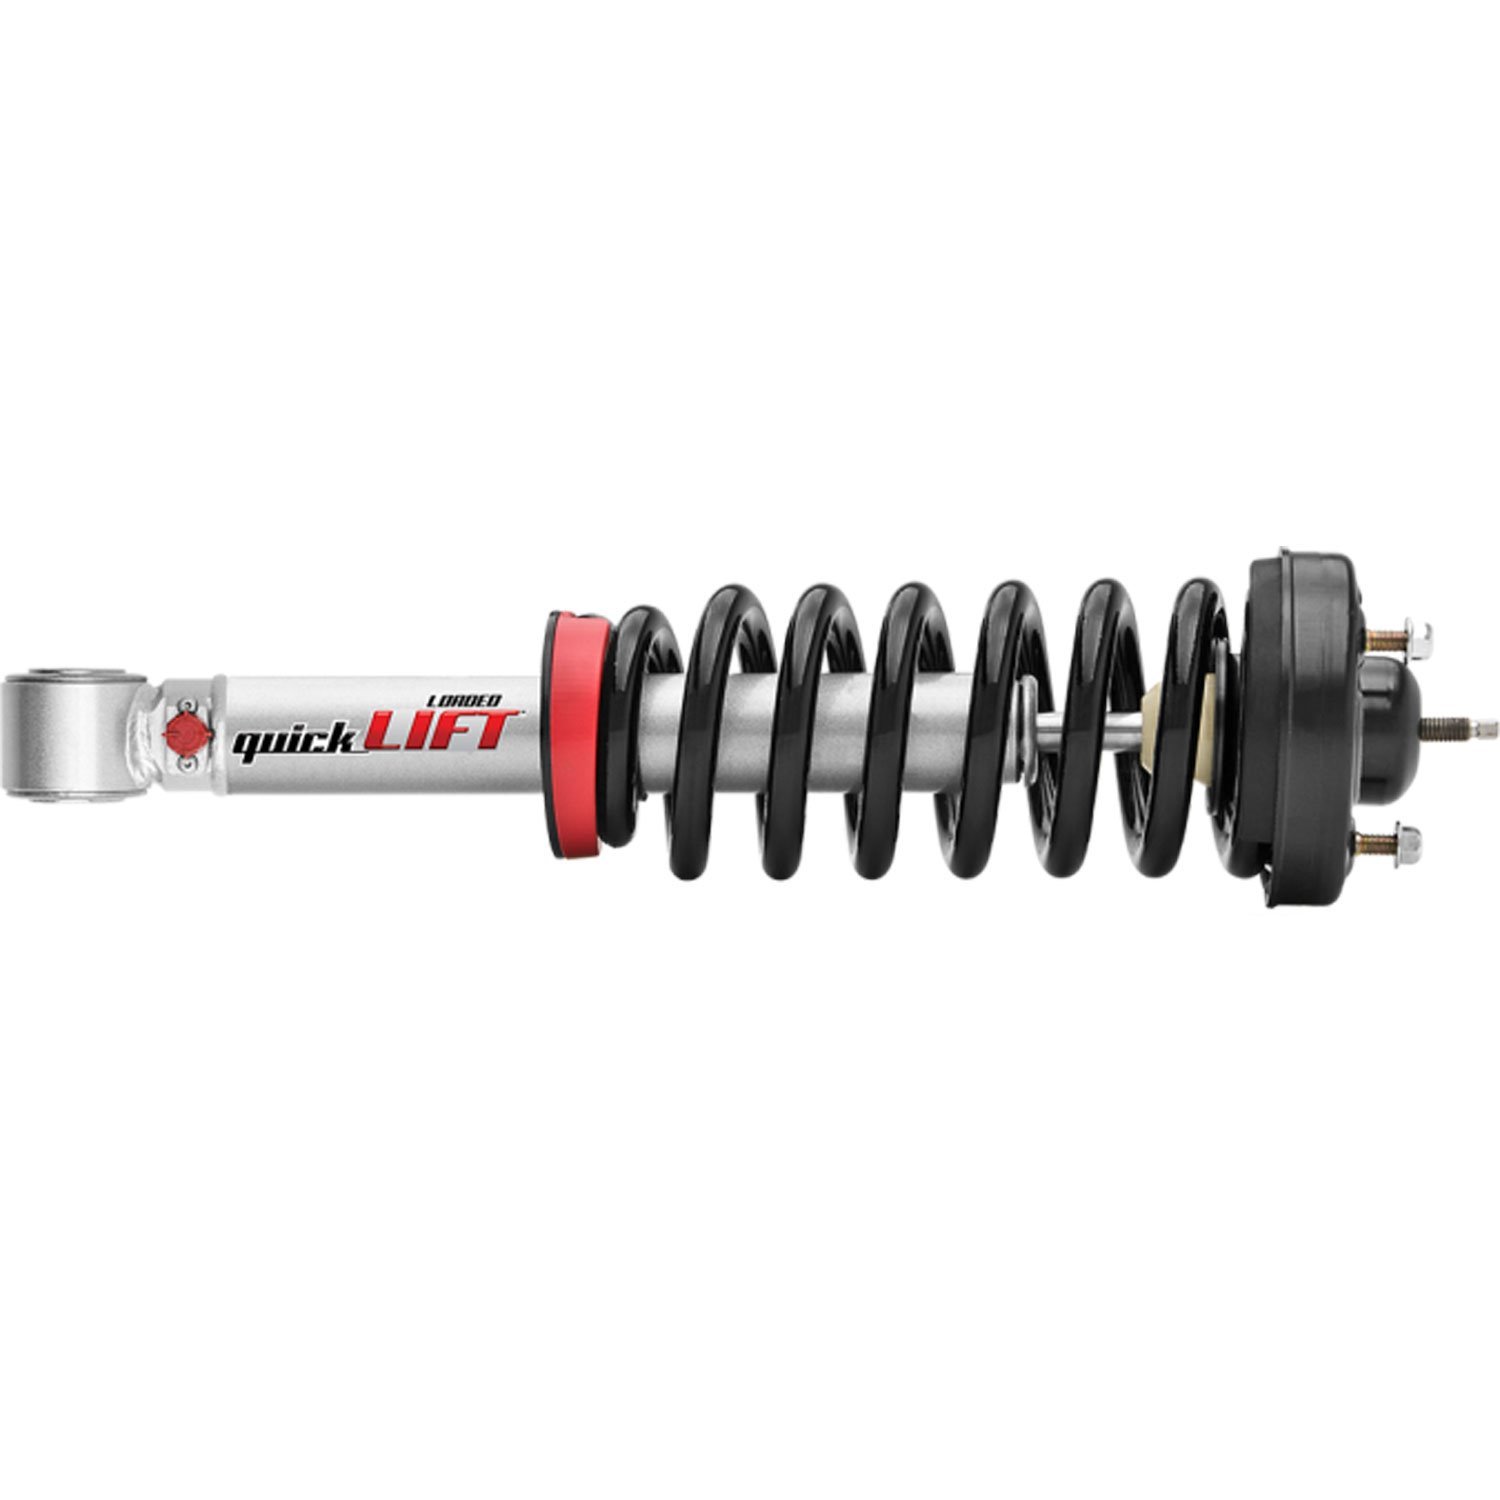 QuickLift Complete Strut Assembly Fits Toyota Tacoma 4WD and Pre-Runner 2WD